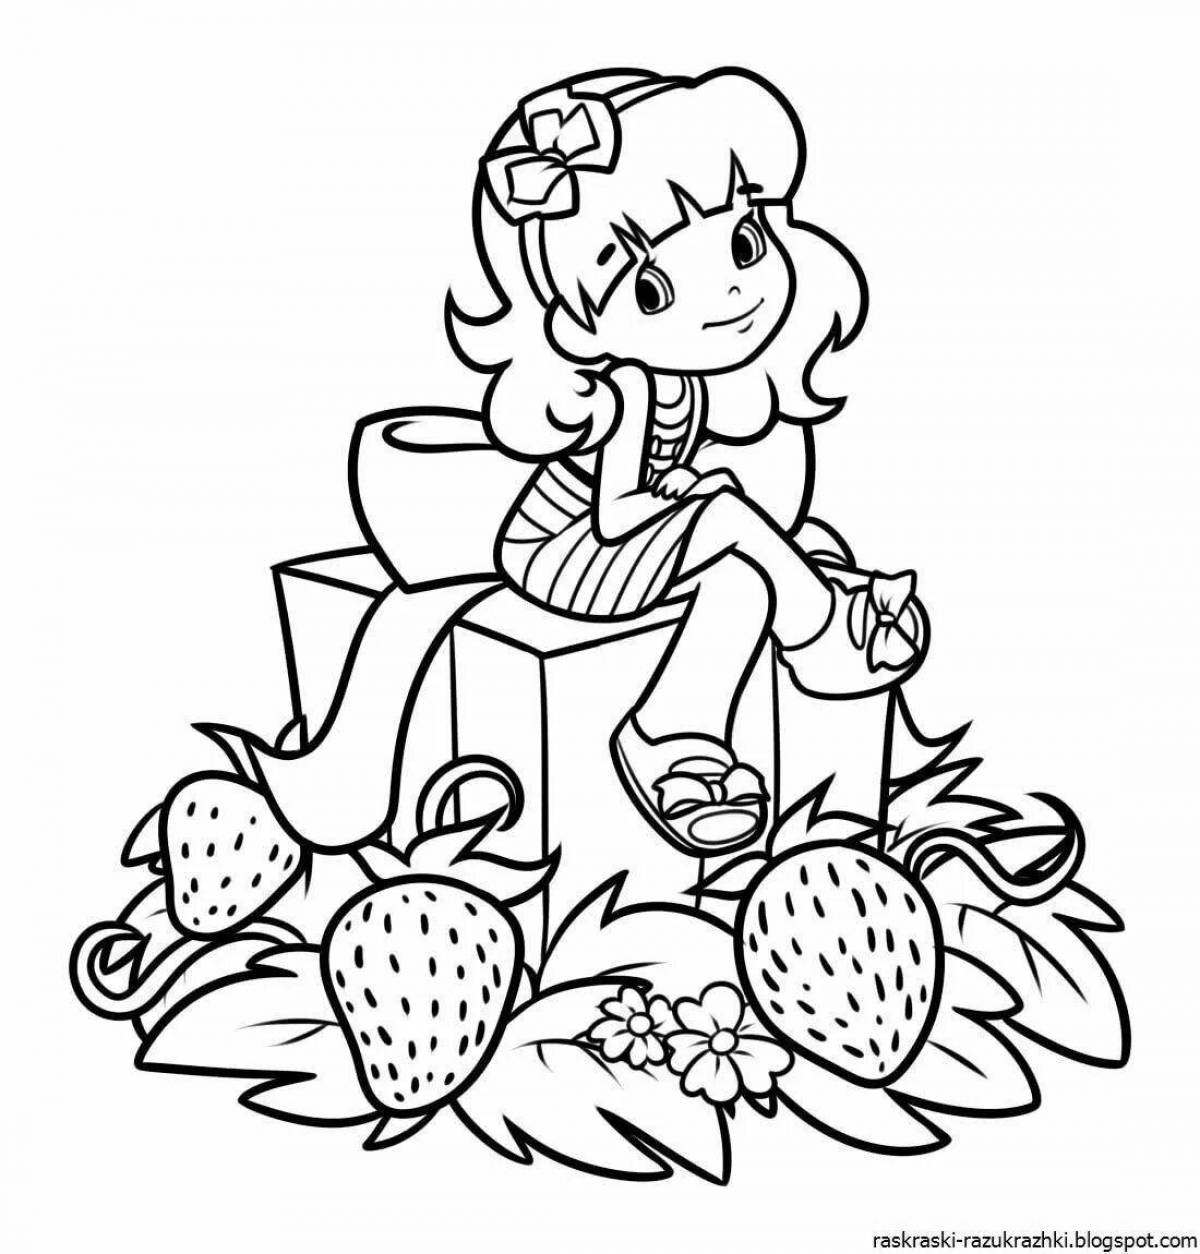 Radiant coloring page 7 for girls